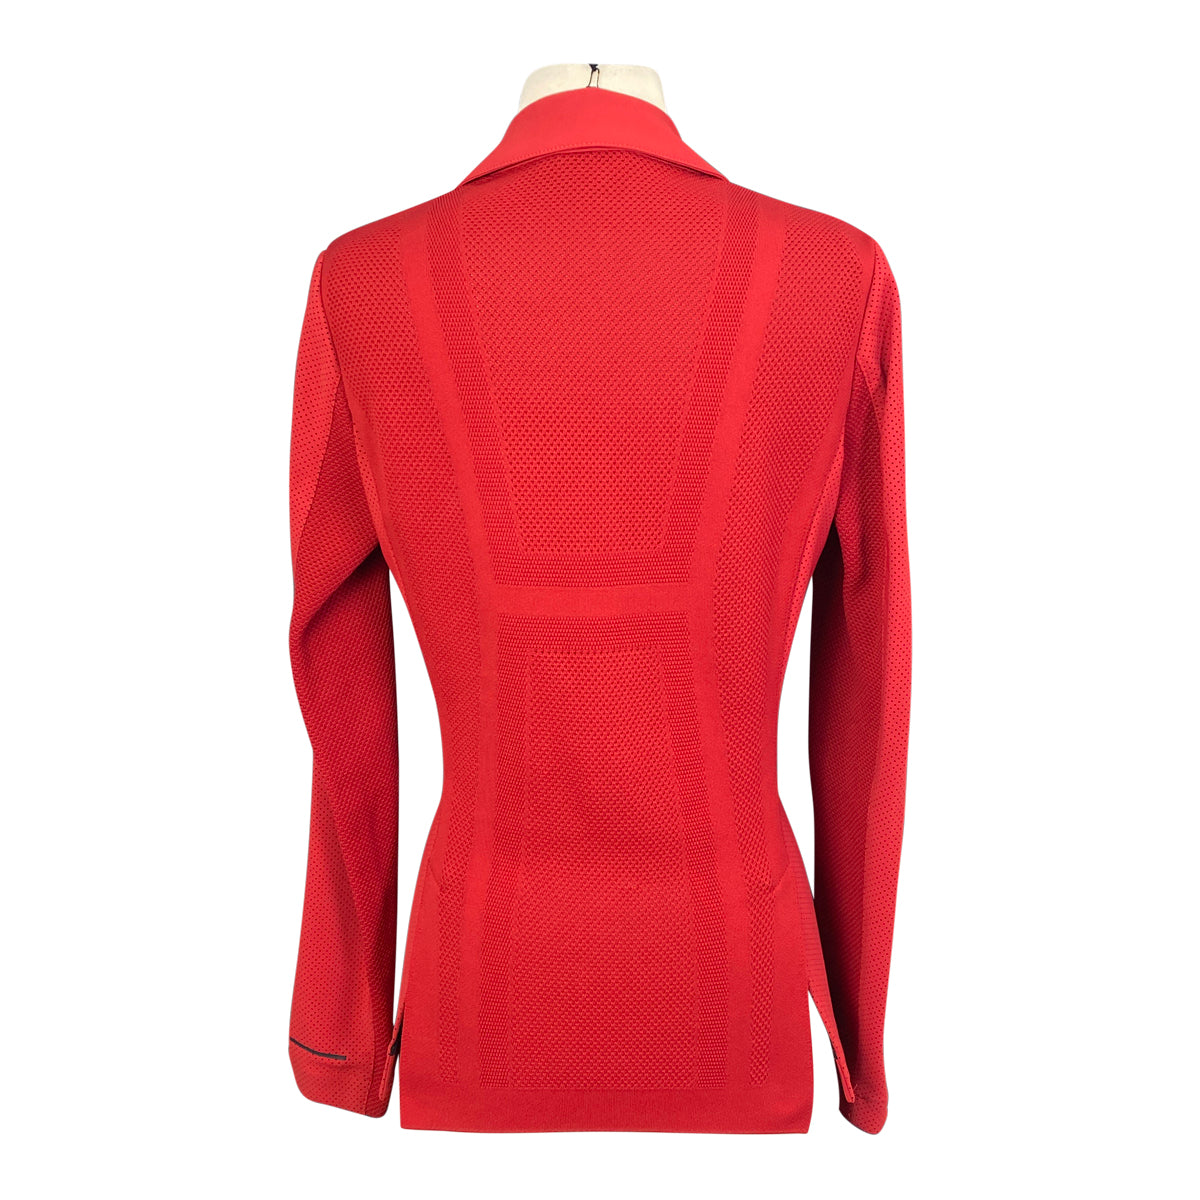 Cavalleria Toscana R-EVO Competition Riding Jacket in International Red